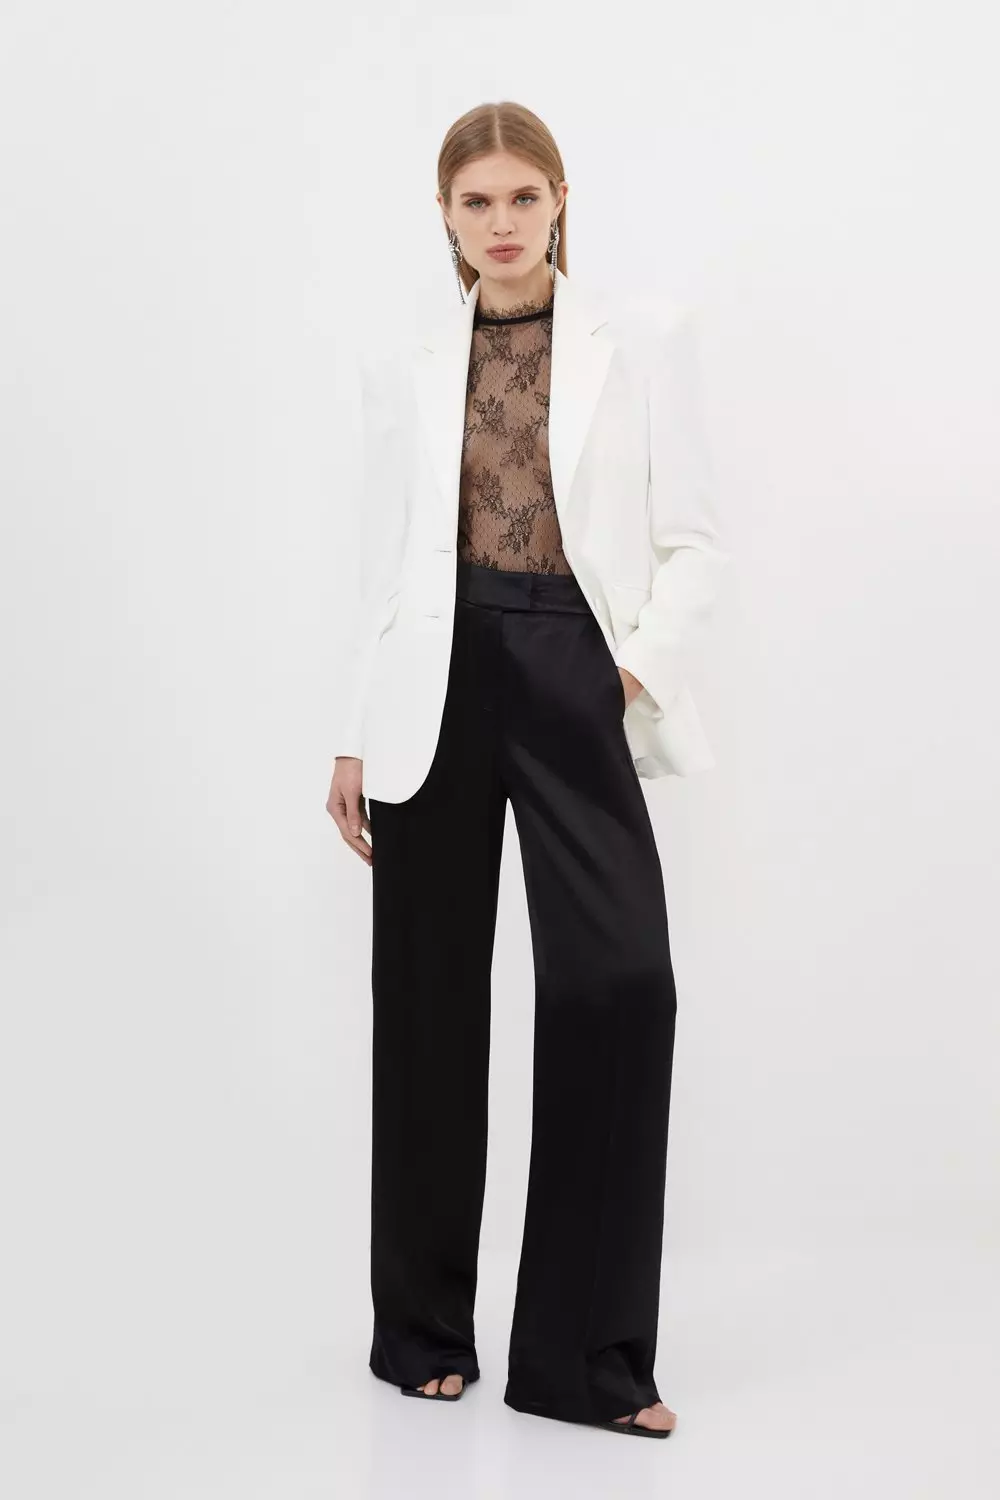 ZARA BLACK SEQUIN TROUSERS LIMITED EDITION HIGH WAIST FLARED LACE